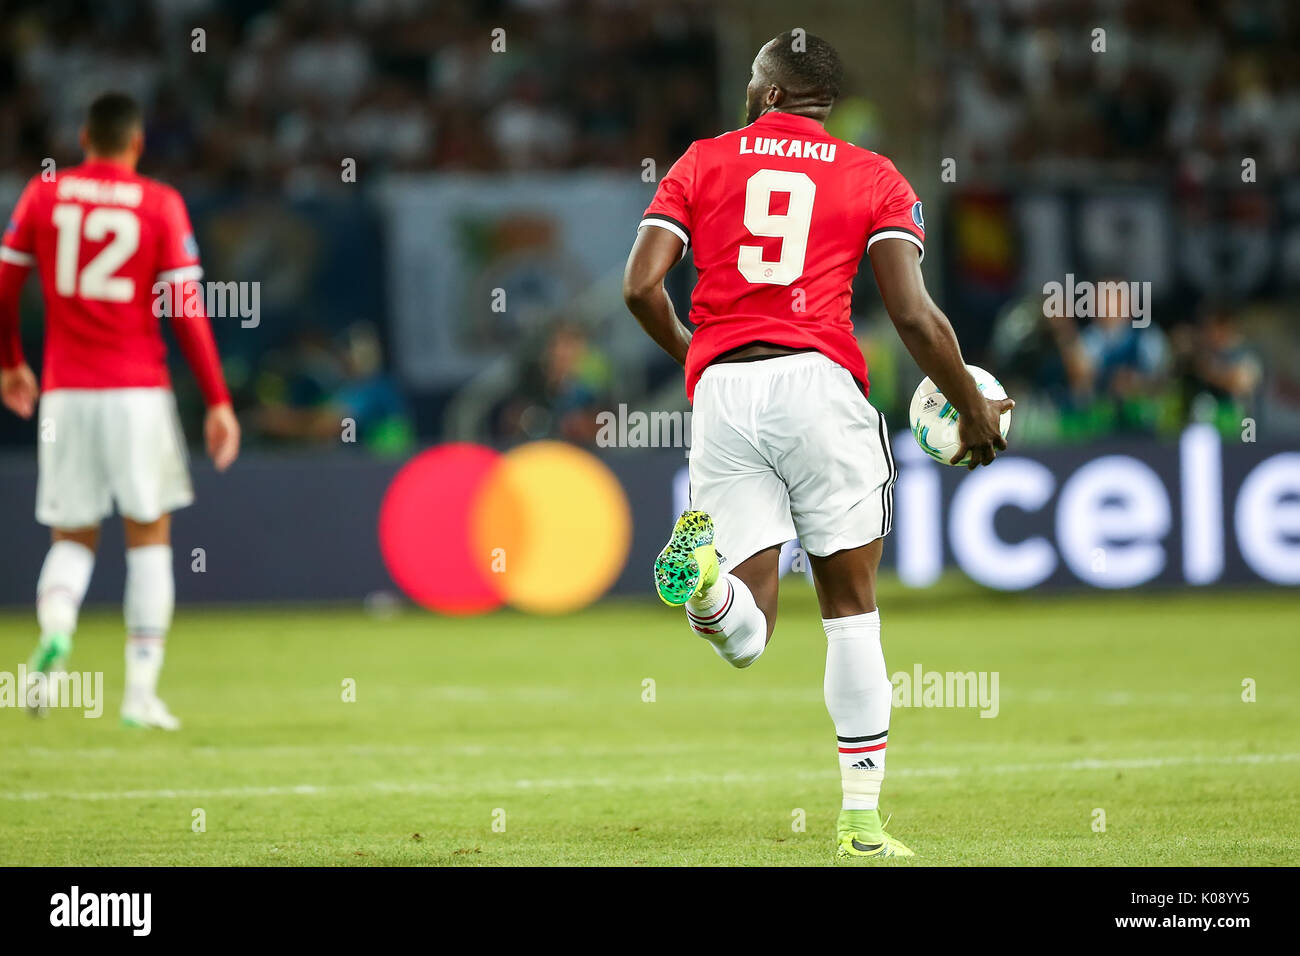 Skopje, FYROM - August 8,2017: Manchester United Romelu Lukaku during the UEFA Super Cup Final match between Real Madrid and Manchester United at Phil Stock Photo